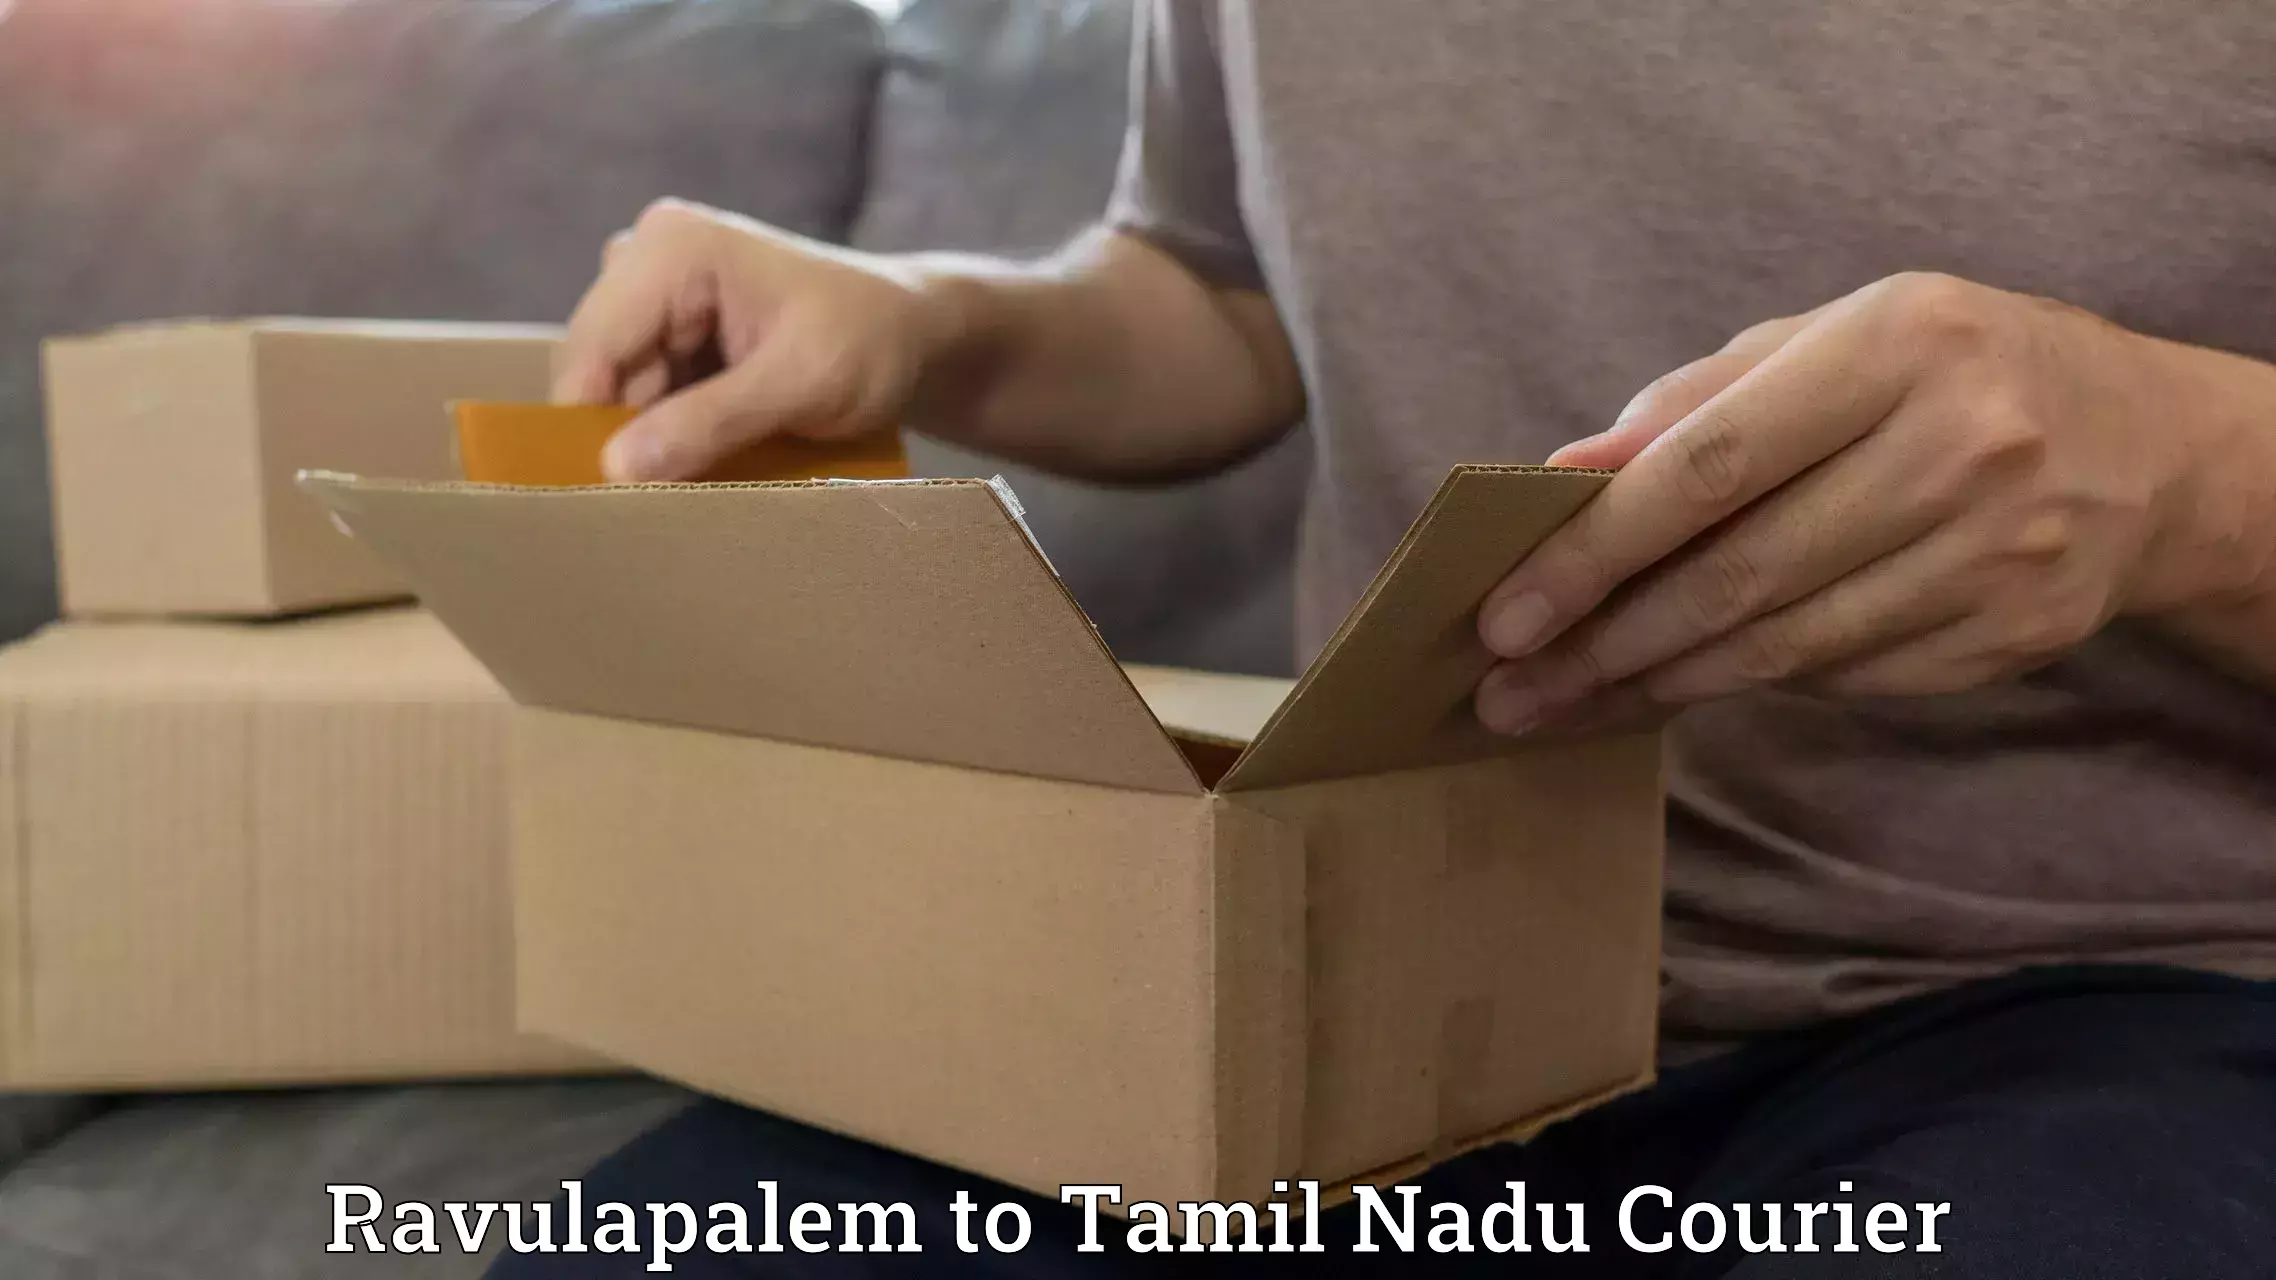 Local delivery service Ravulapalem to Chennai Port